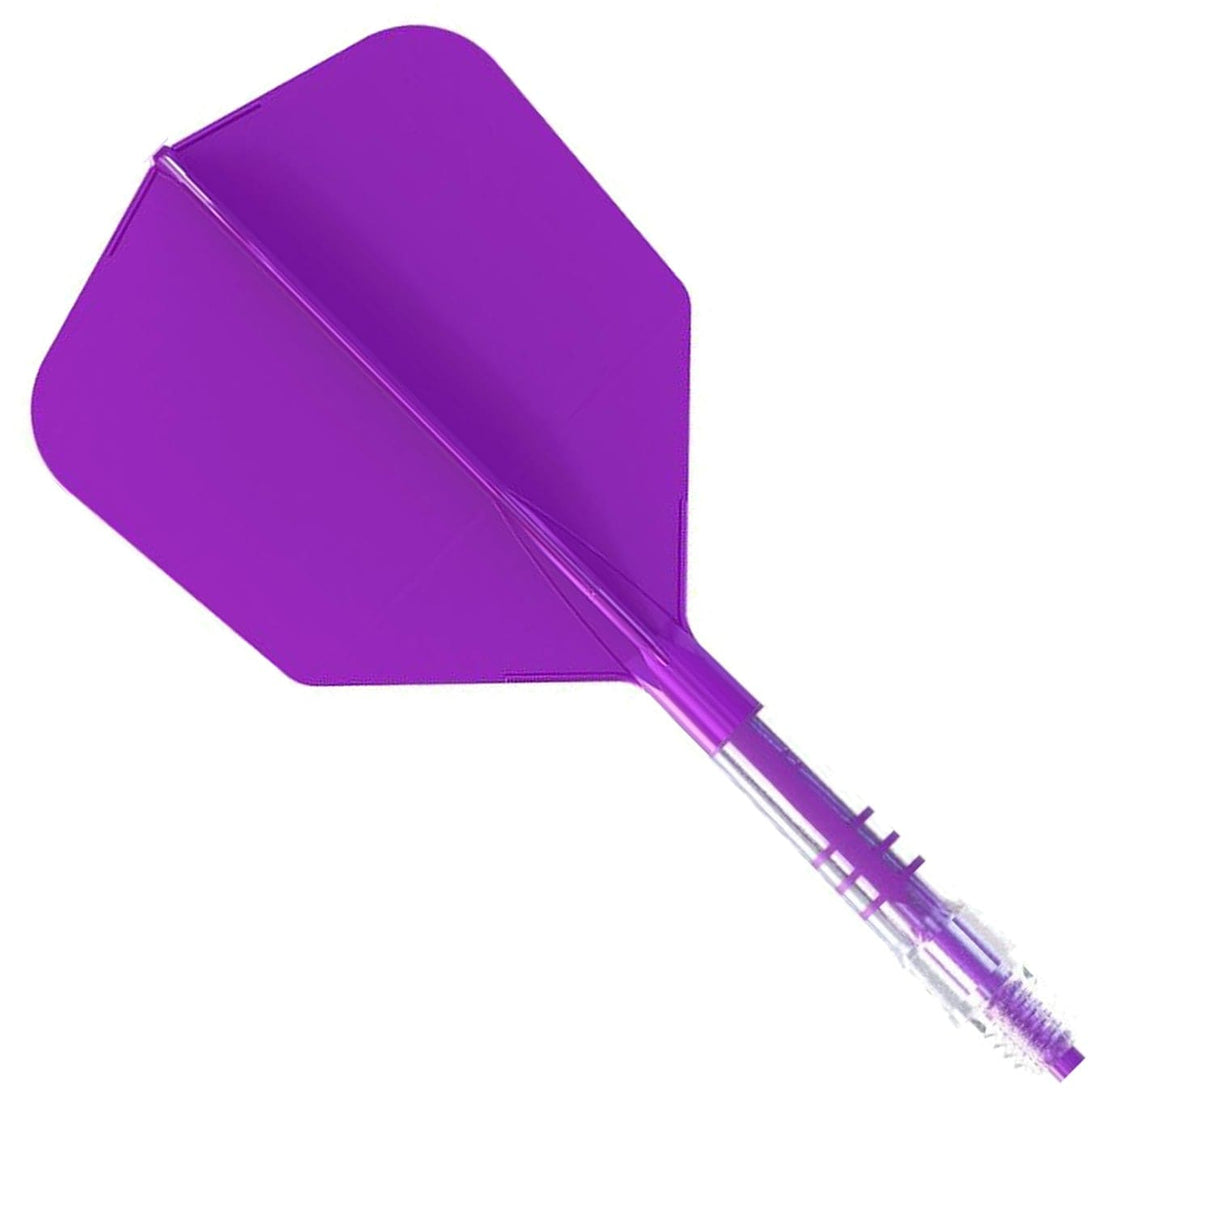 Cuesoul Rost T19 Carbon Fibre - Integrated Dart Shaft and Flights - Big Wing - Purple Size 2